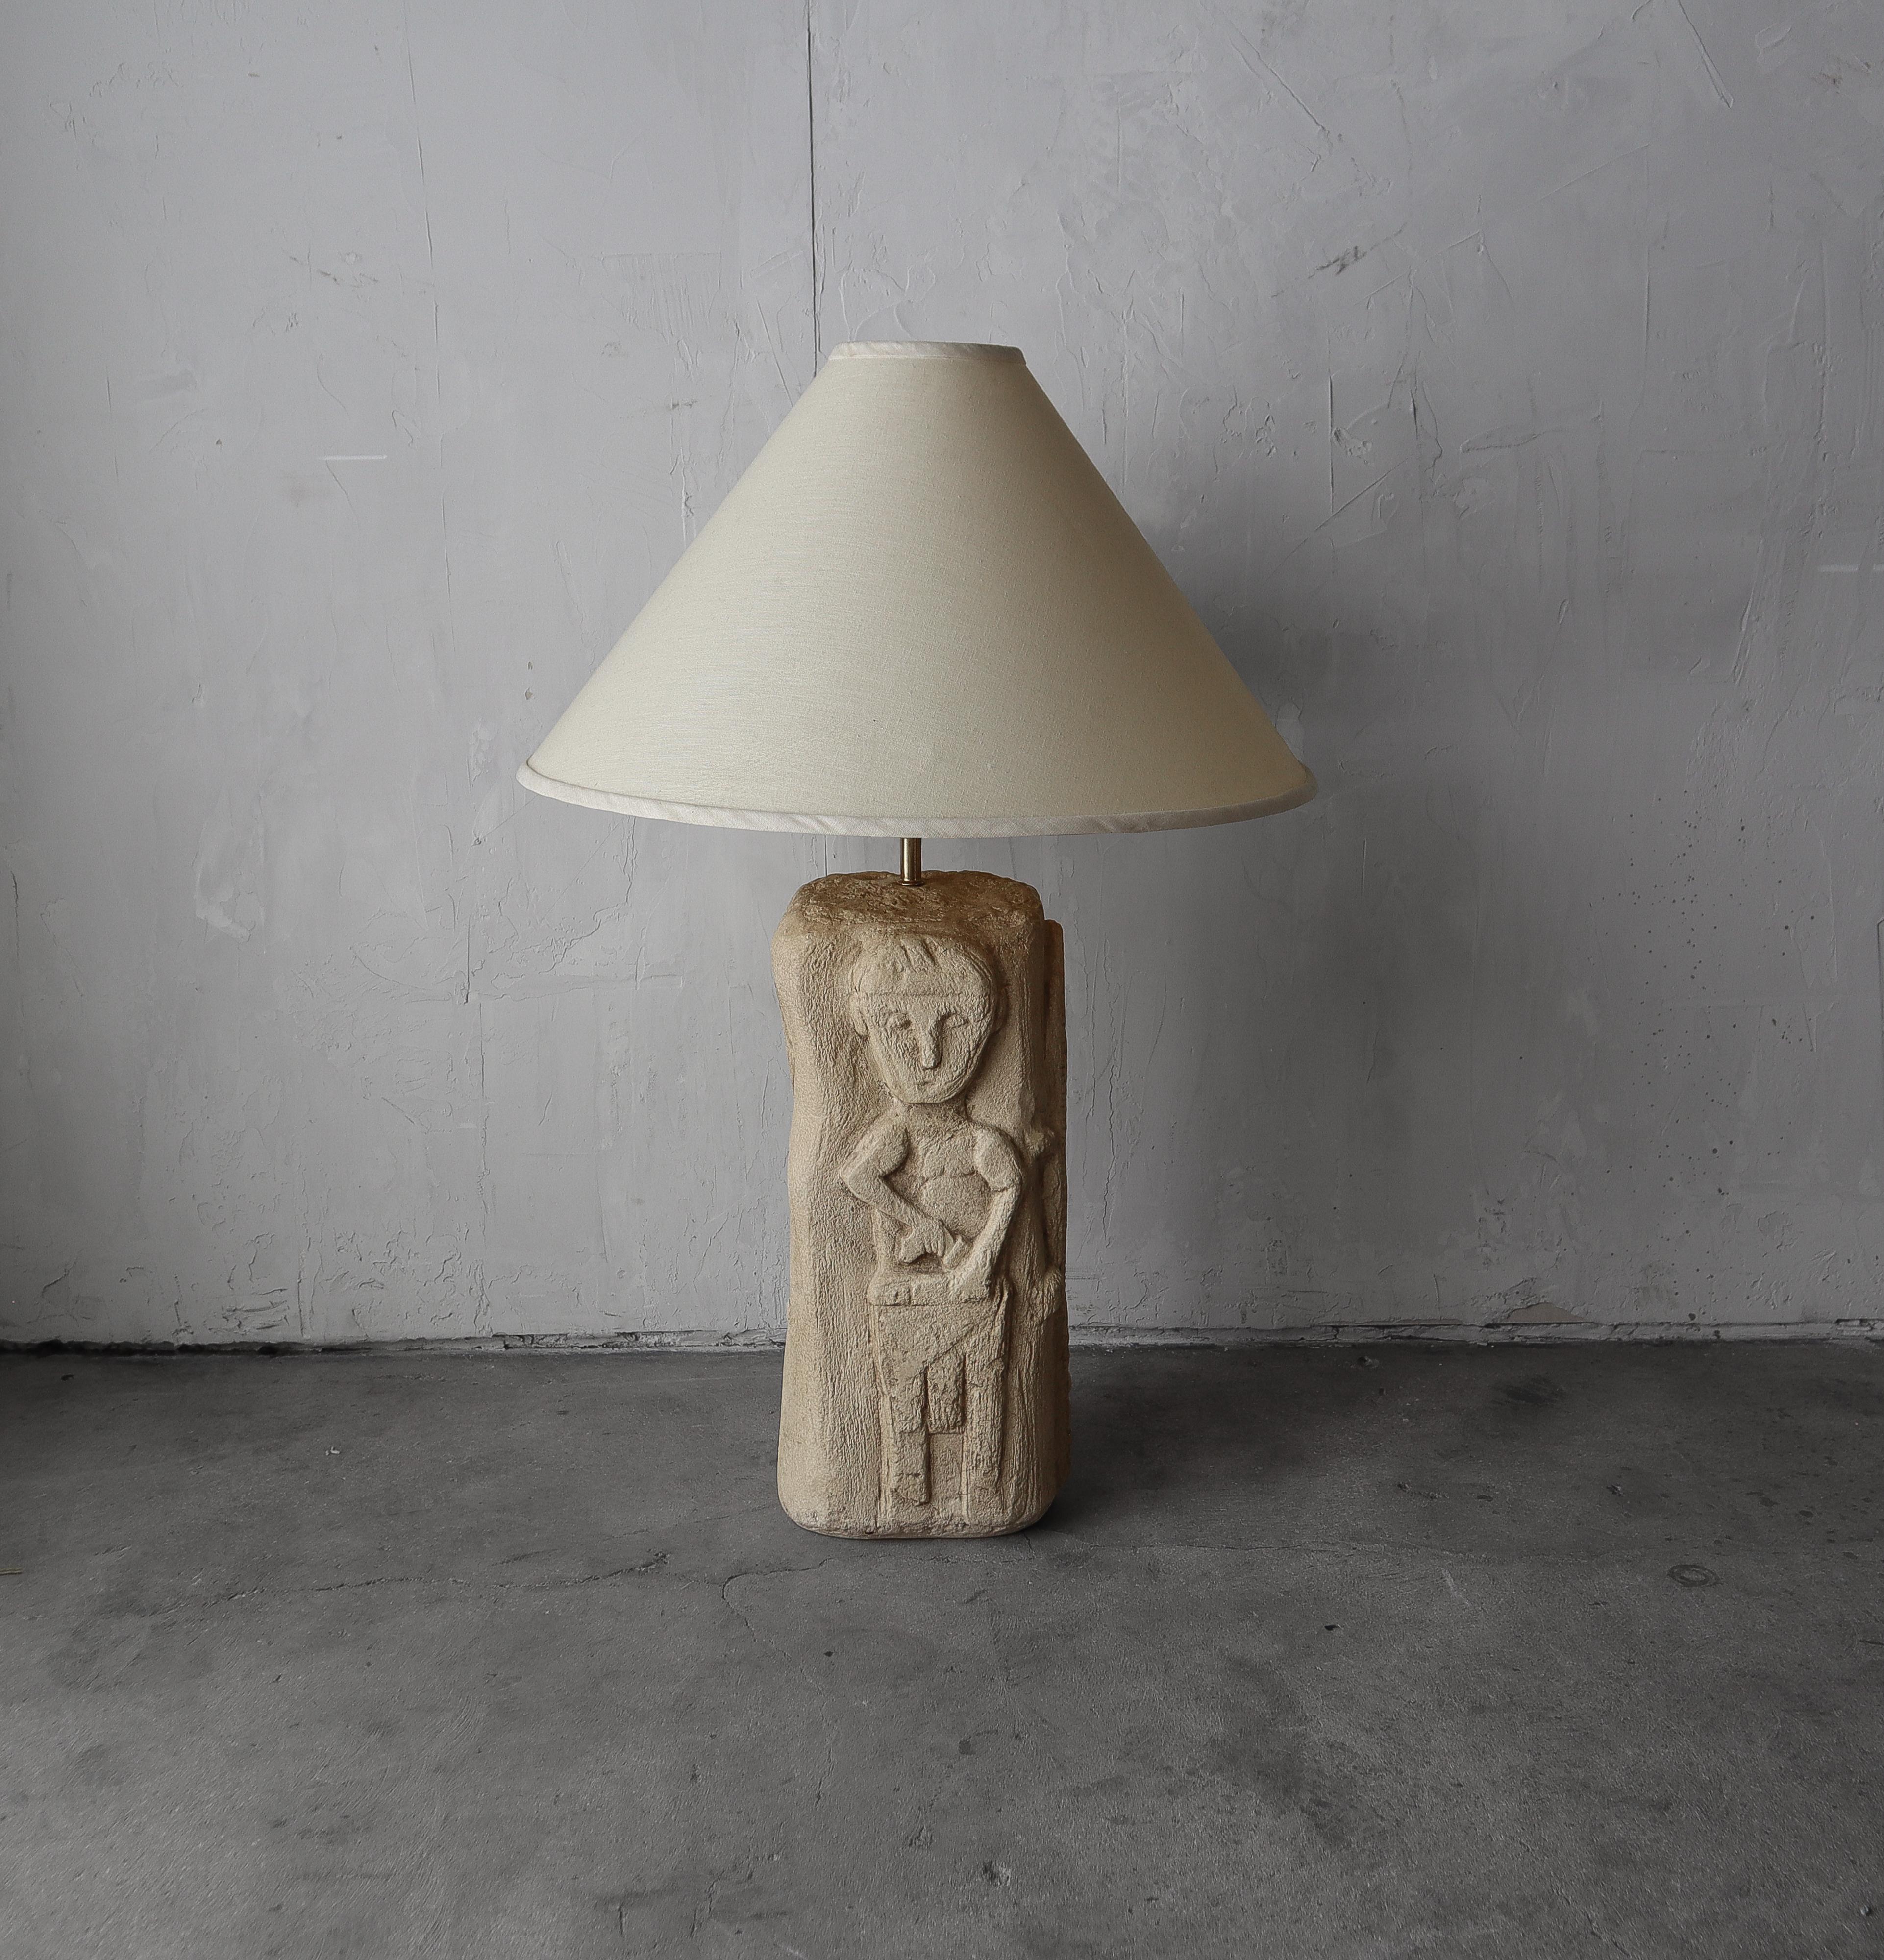 Large solid and very HEAVY ceramic table lamp with indigenous tribal theme depicted in dimensional symbolic imagery.  A truly bespoke piece.

Lamp is in excellent, working condition with no imperfections to be noted.